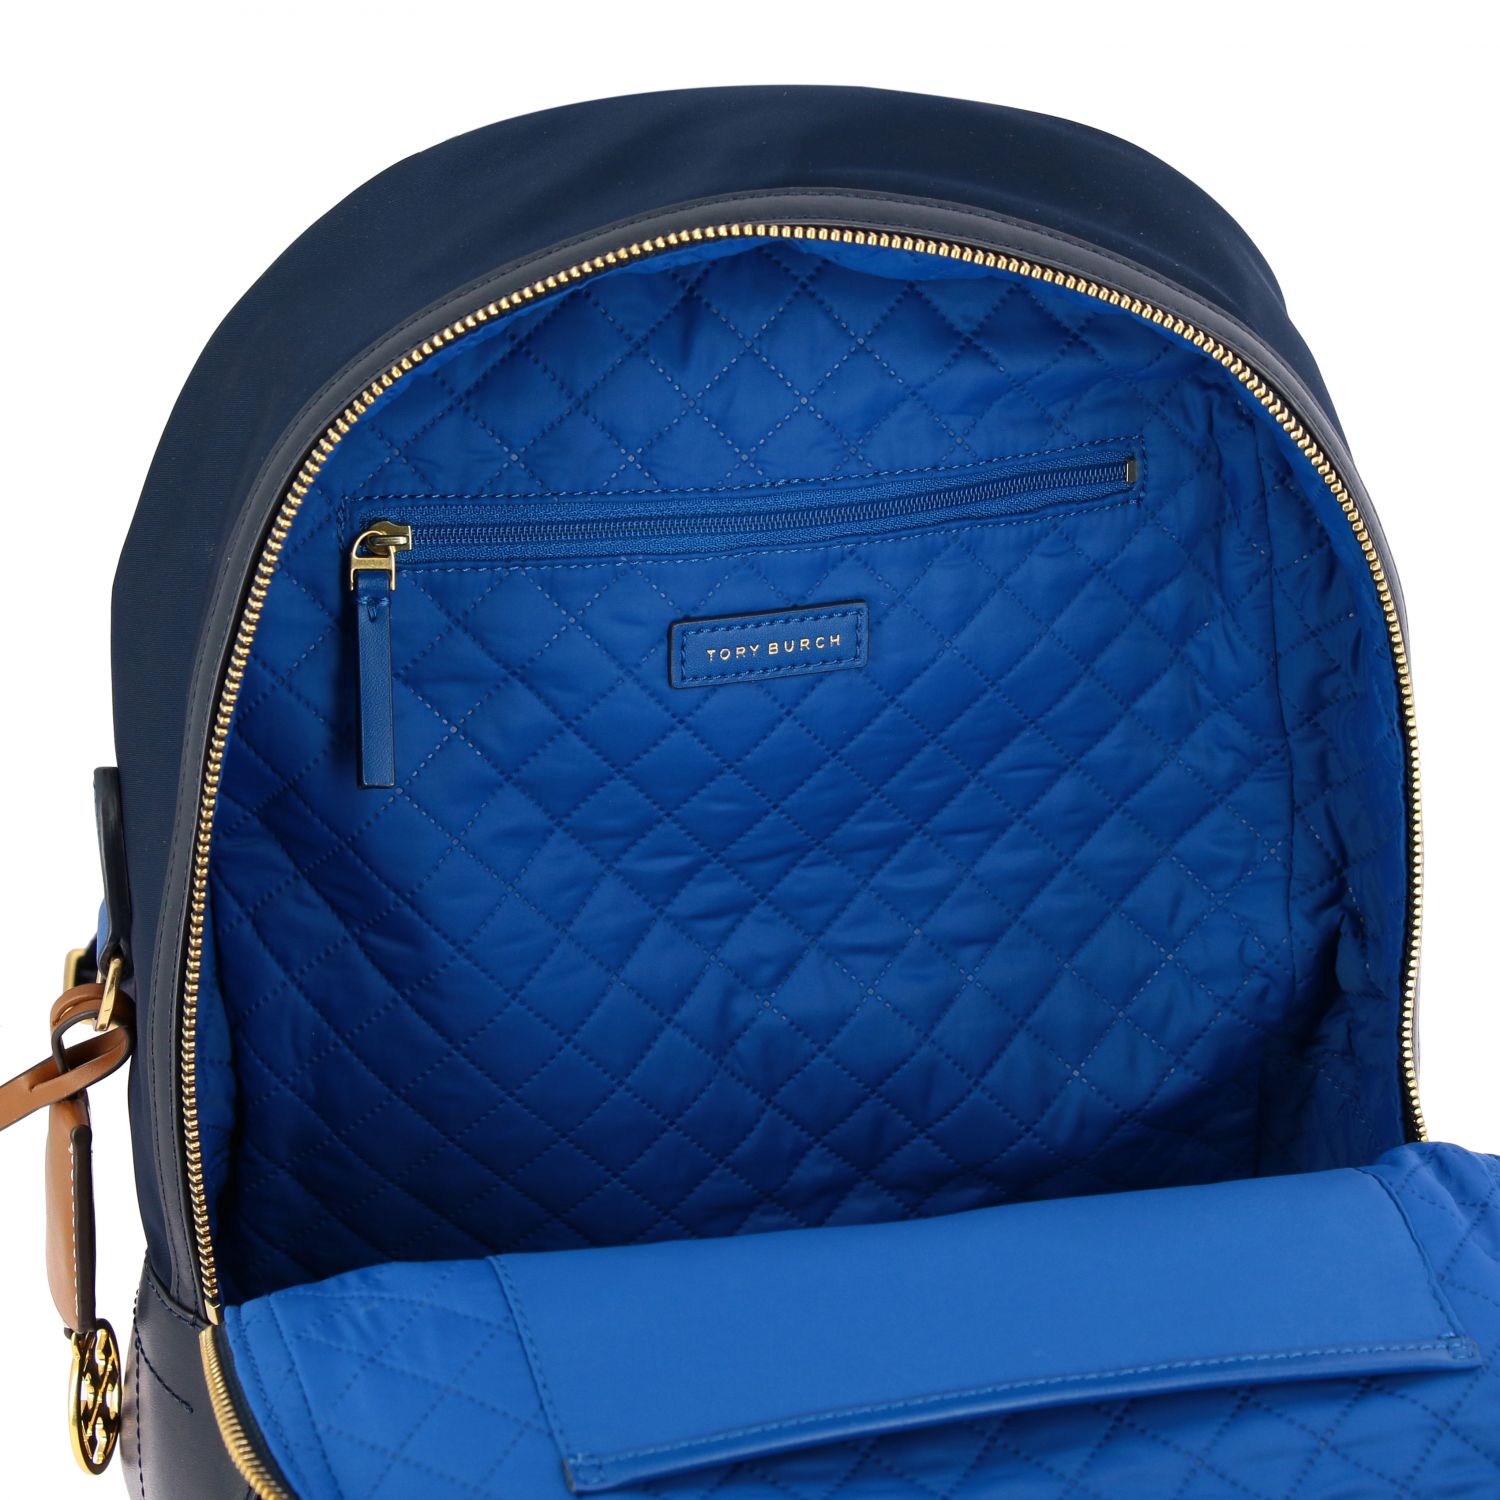 Tory Burch Outlet: backpack for women - Blue | Tory Burch backpack 58400  online on 